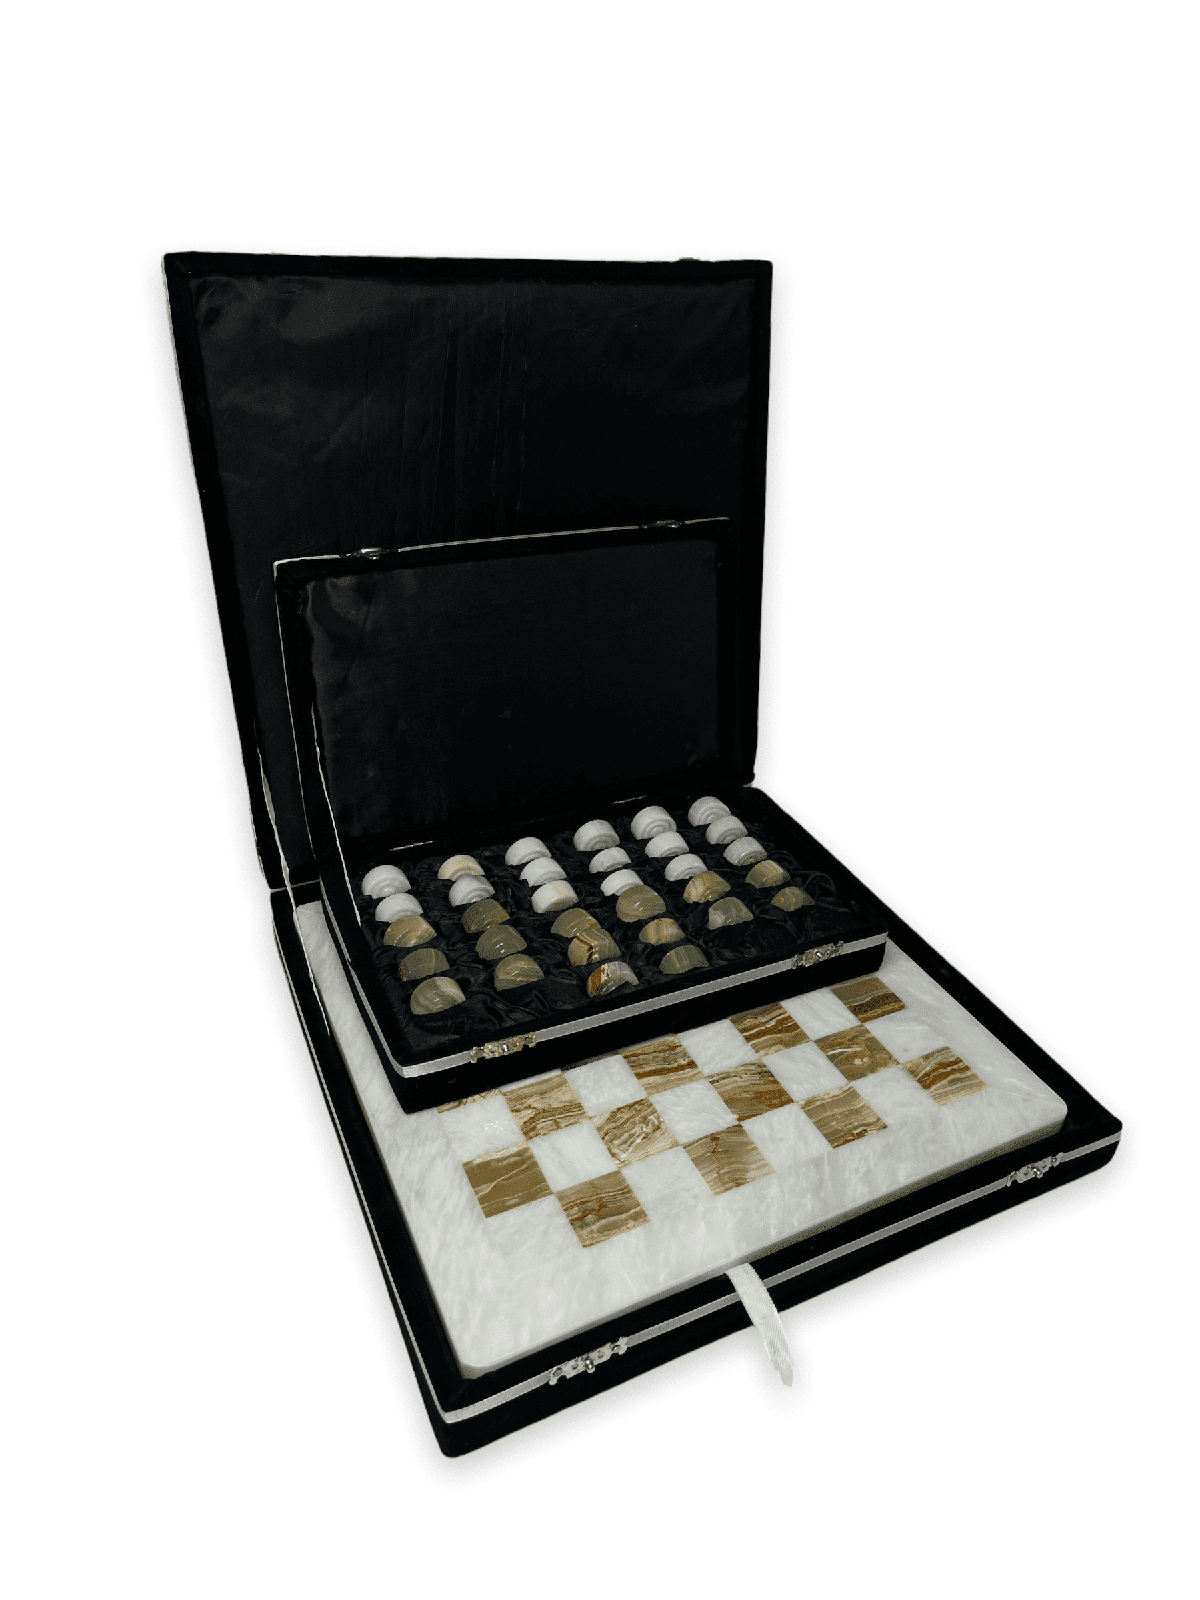 Marble Checkers Set with Storage Case - White and Onyx - Marble Cultures